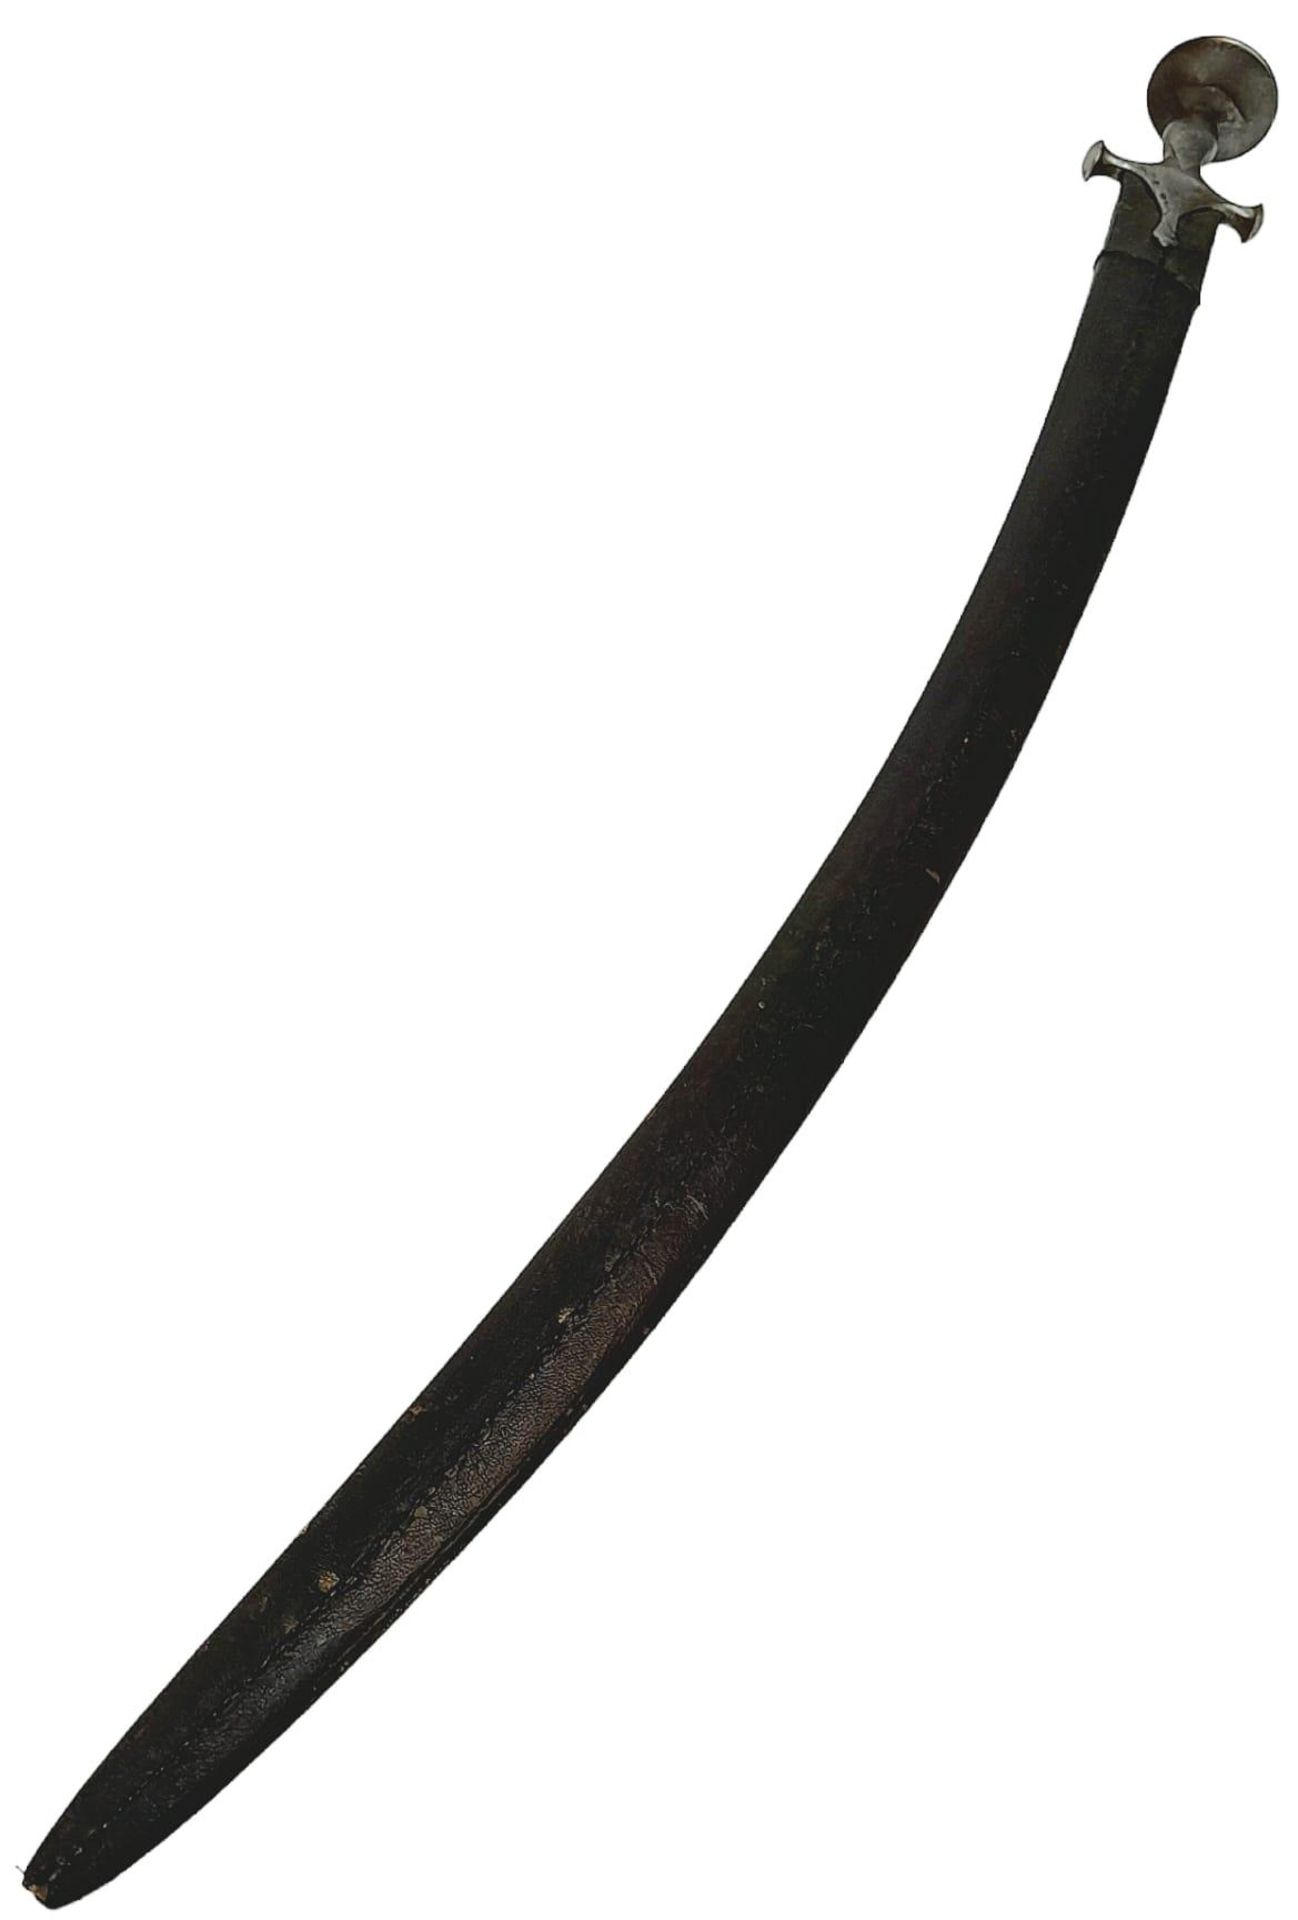 A Vintage Indian/Persian Tulwar Sword with Leather Scabbard. Iron Hilt with Cross Guard. 92cm - Image 4 of 4